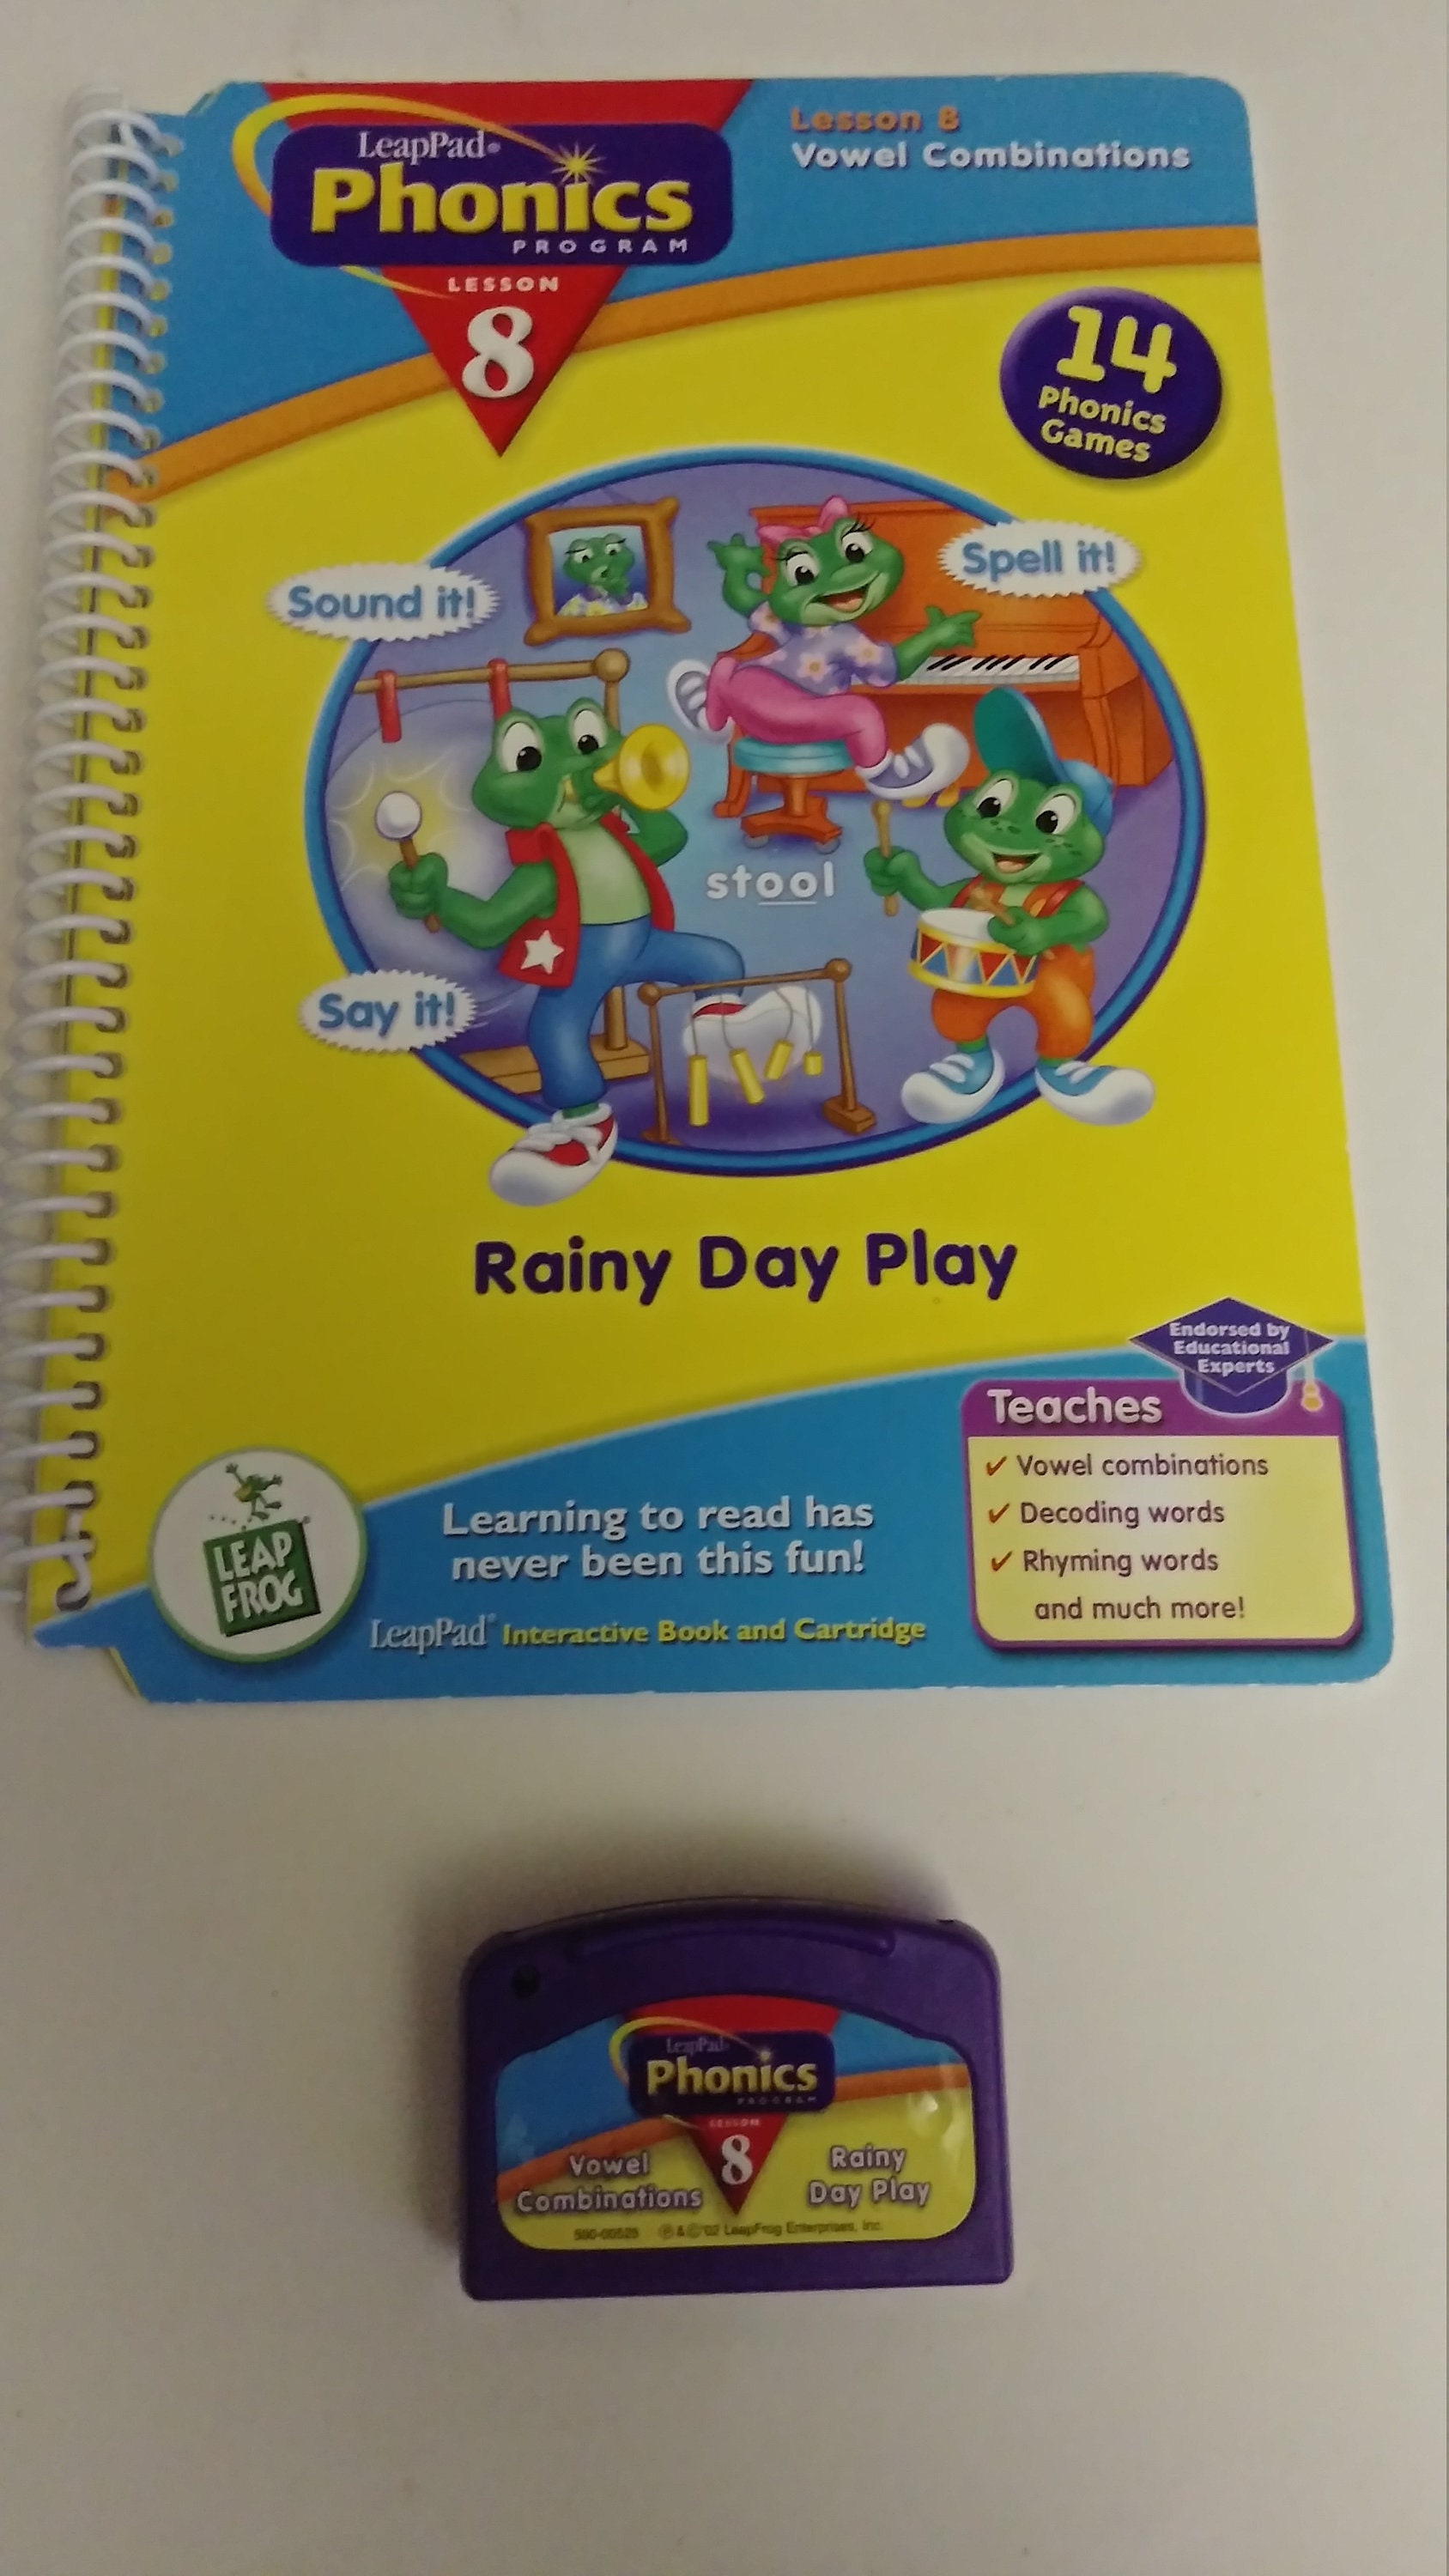 LeapFrog LeapPad Phonics Lesson 10 Book & Cartridge a Fisherman's Tale for sale online 